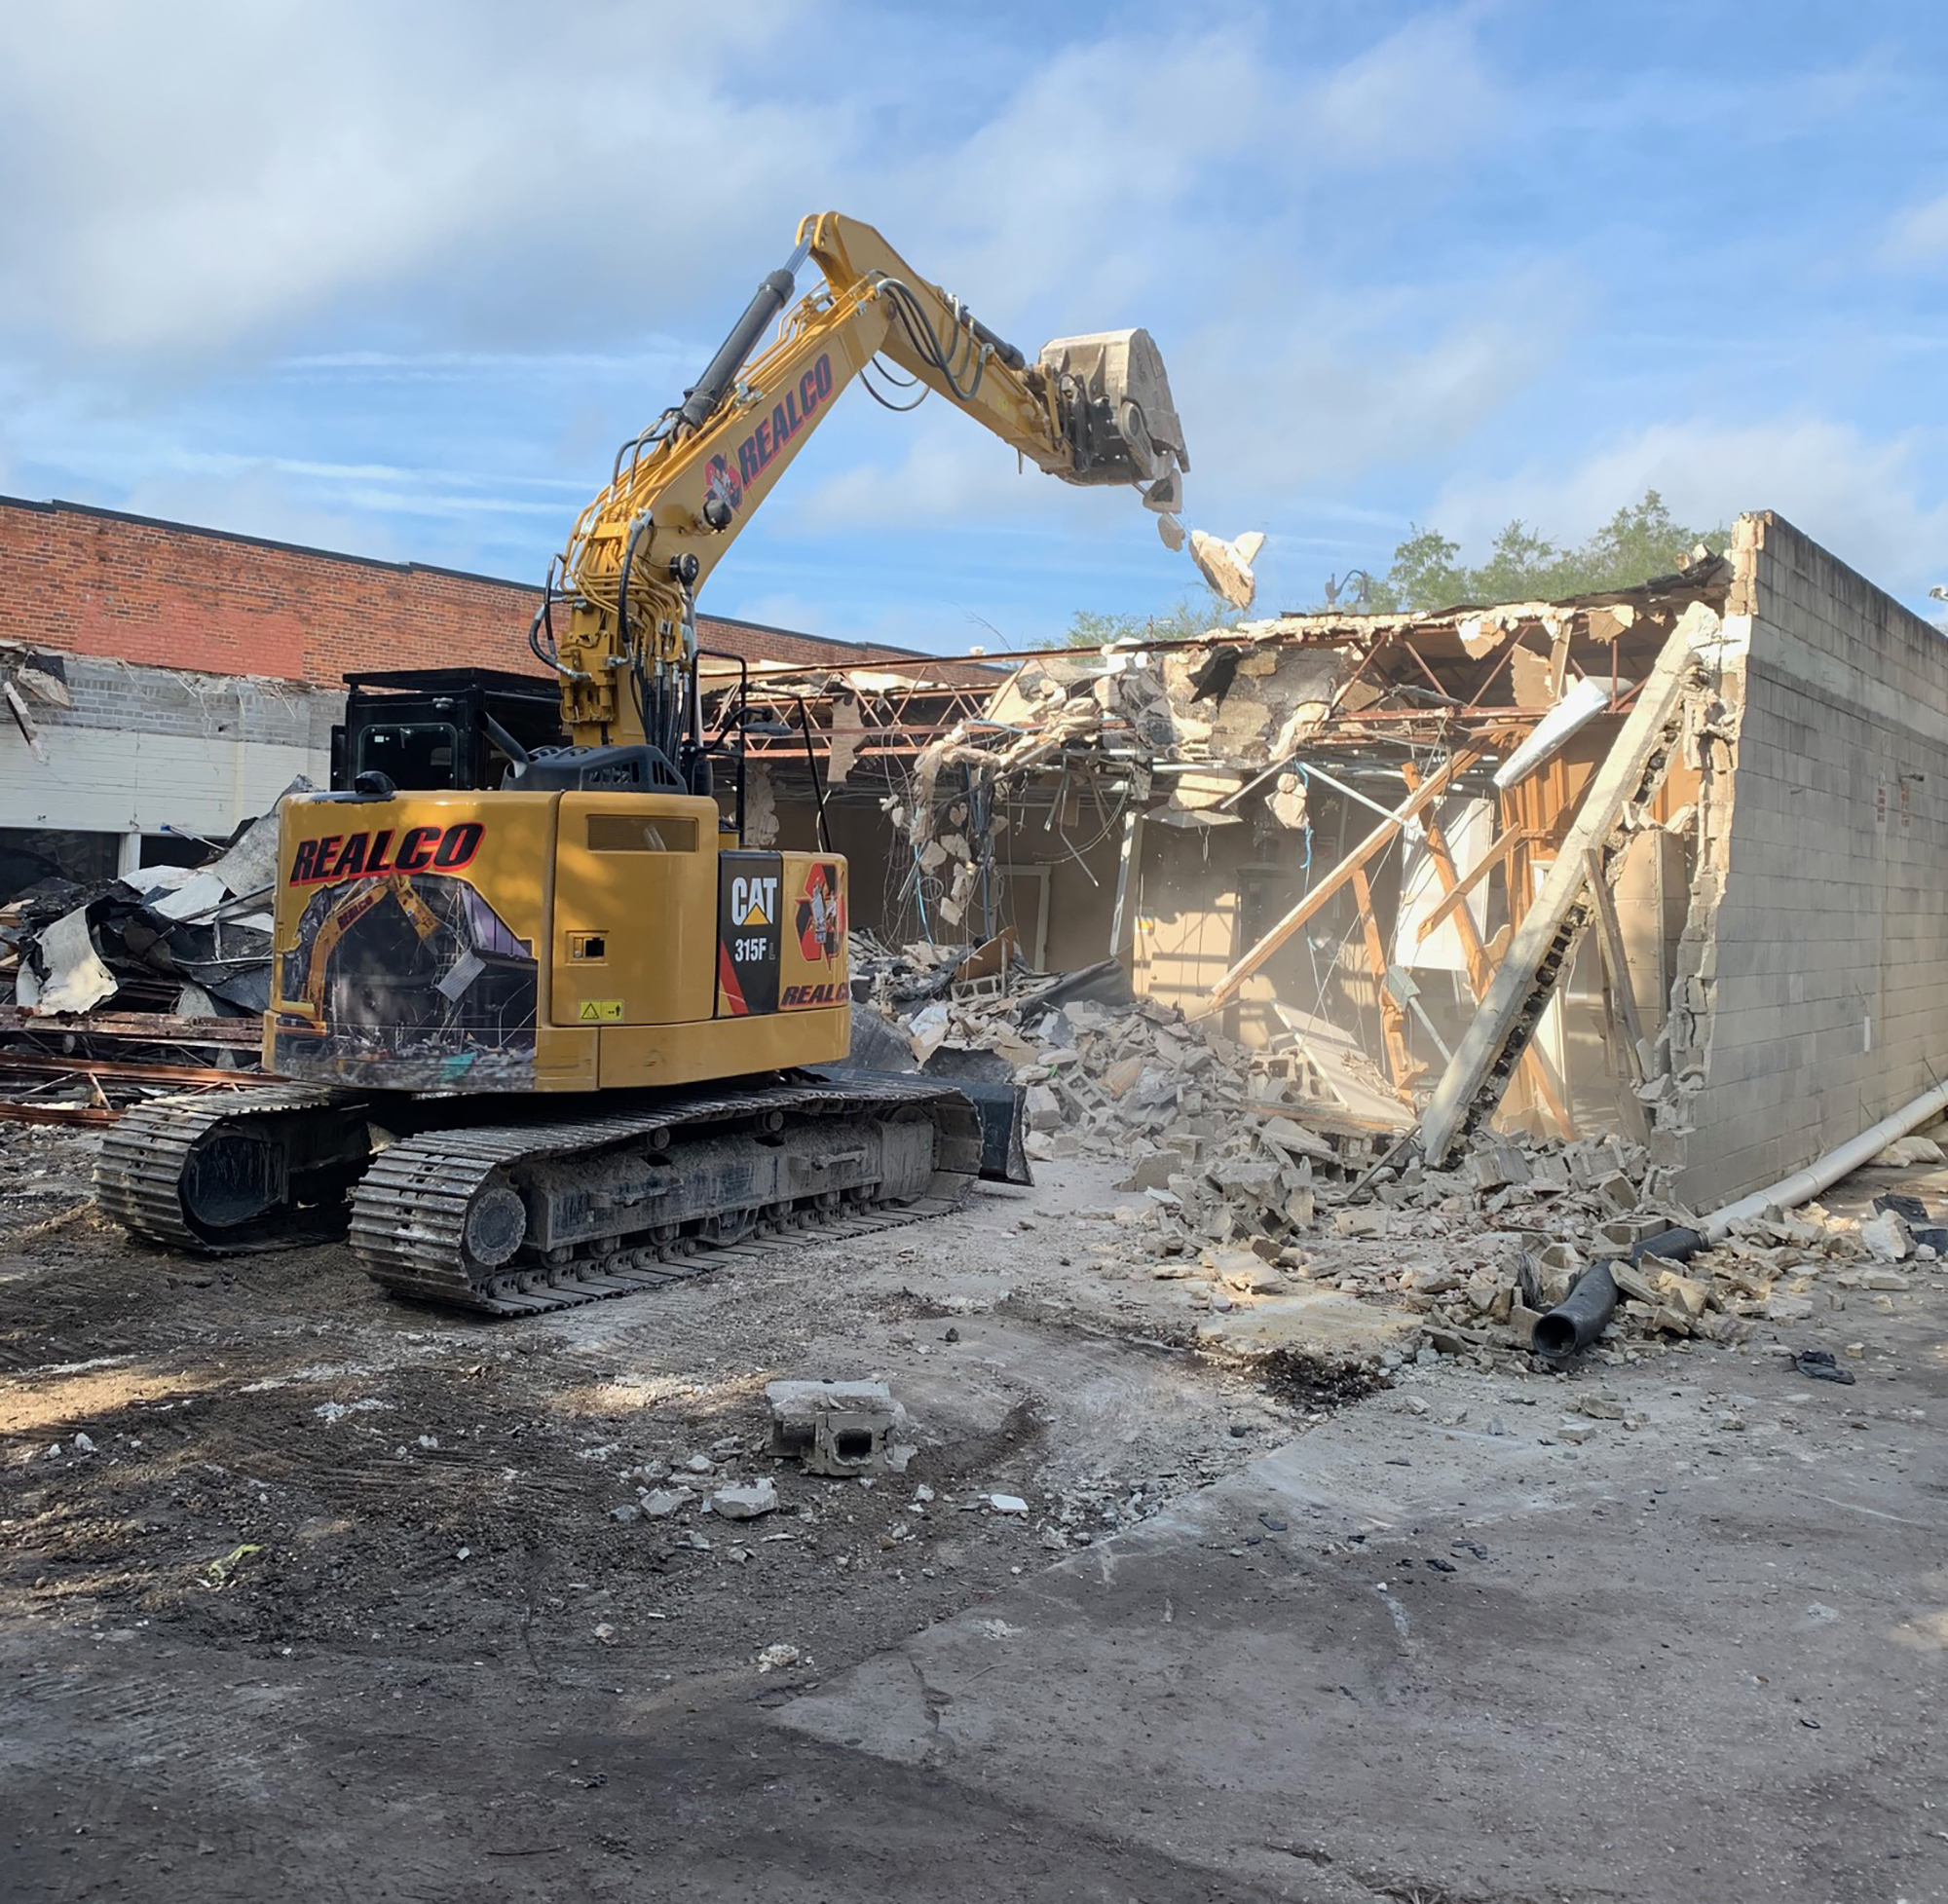 Property owner Edward Skinner Jones said Jan. 2 that demolition could take about four days. (Courtesy of Chris Goodin)